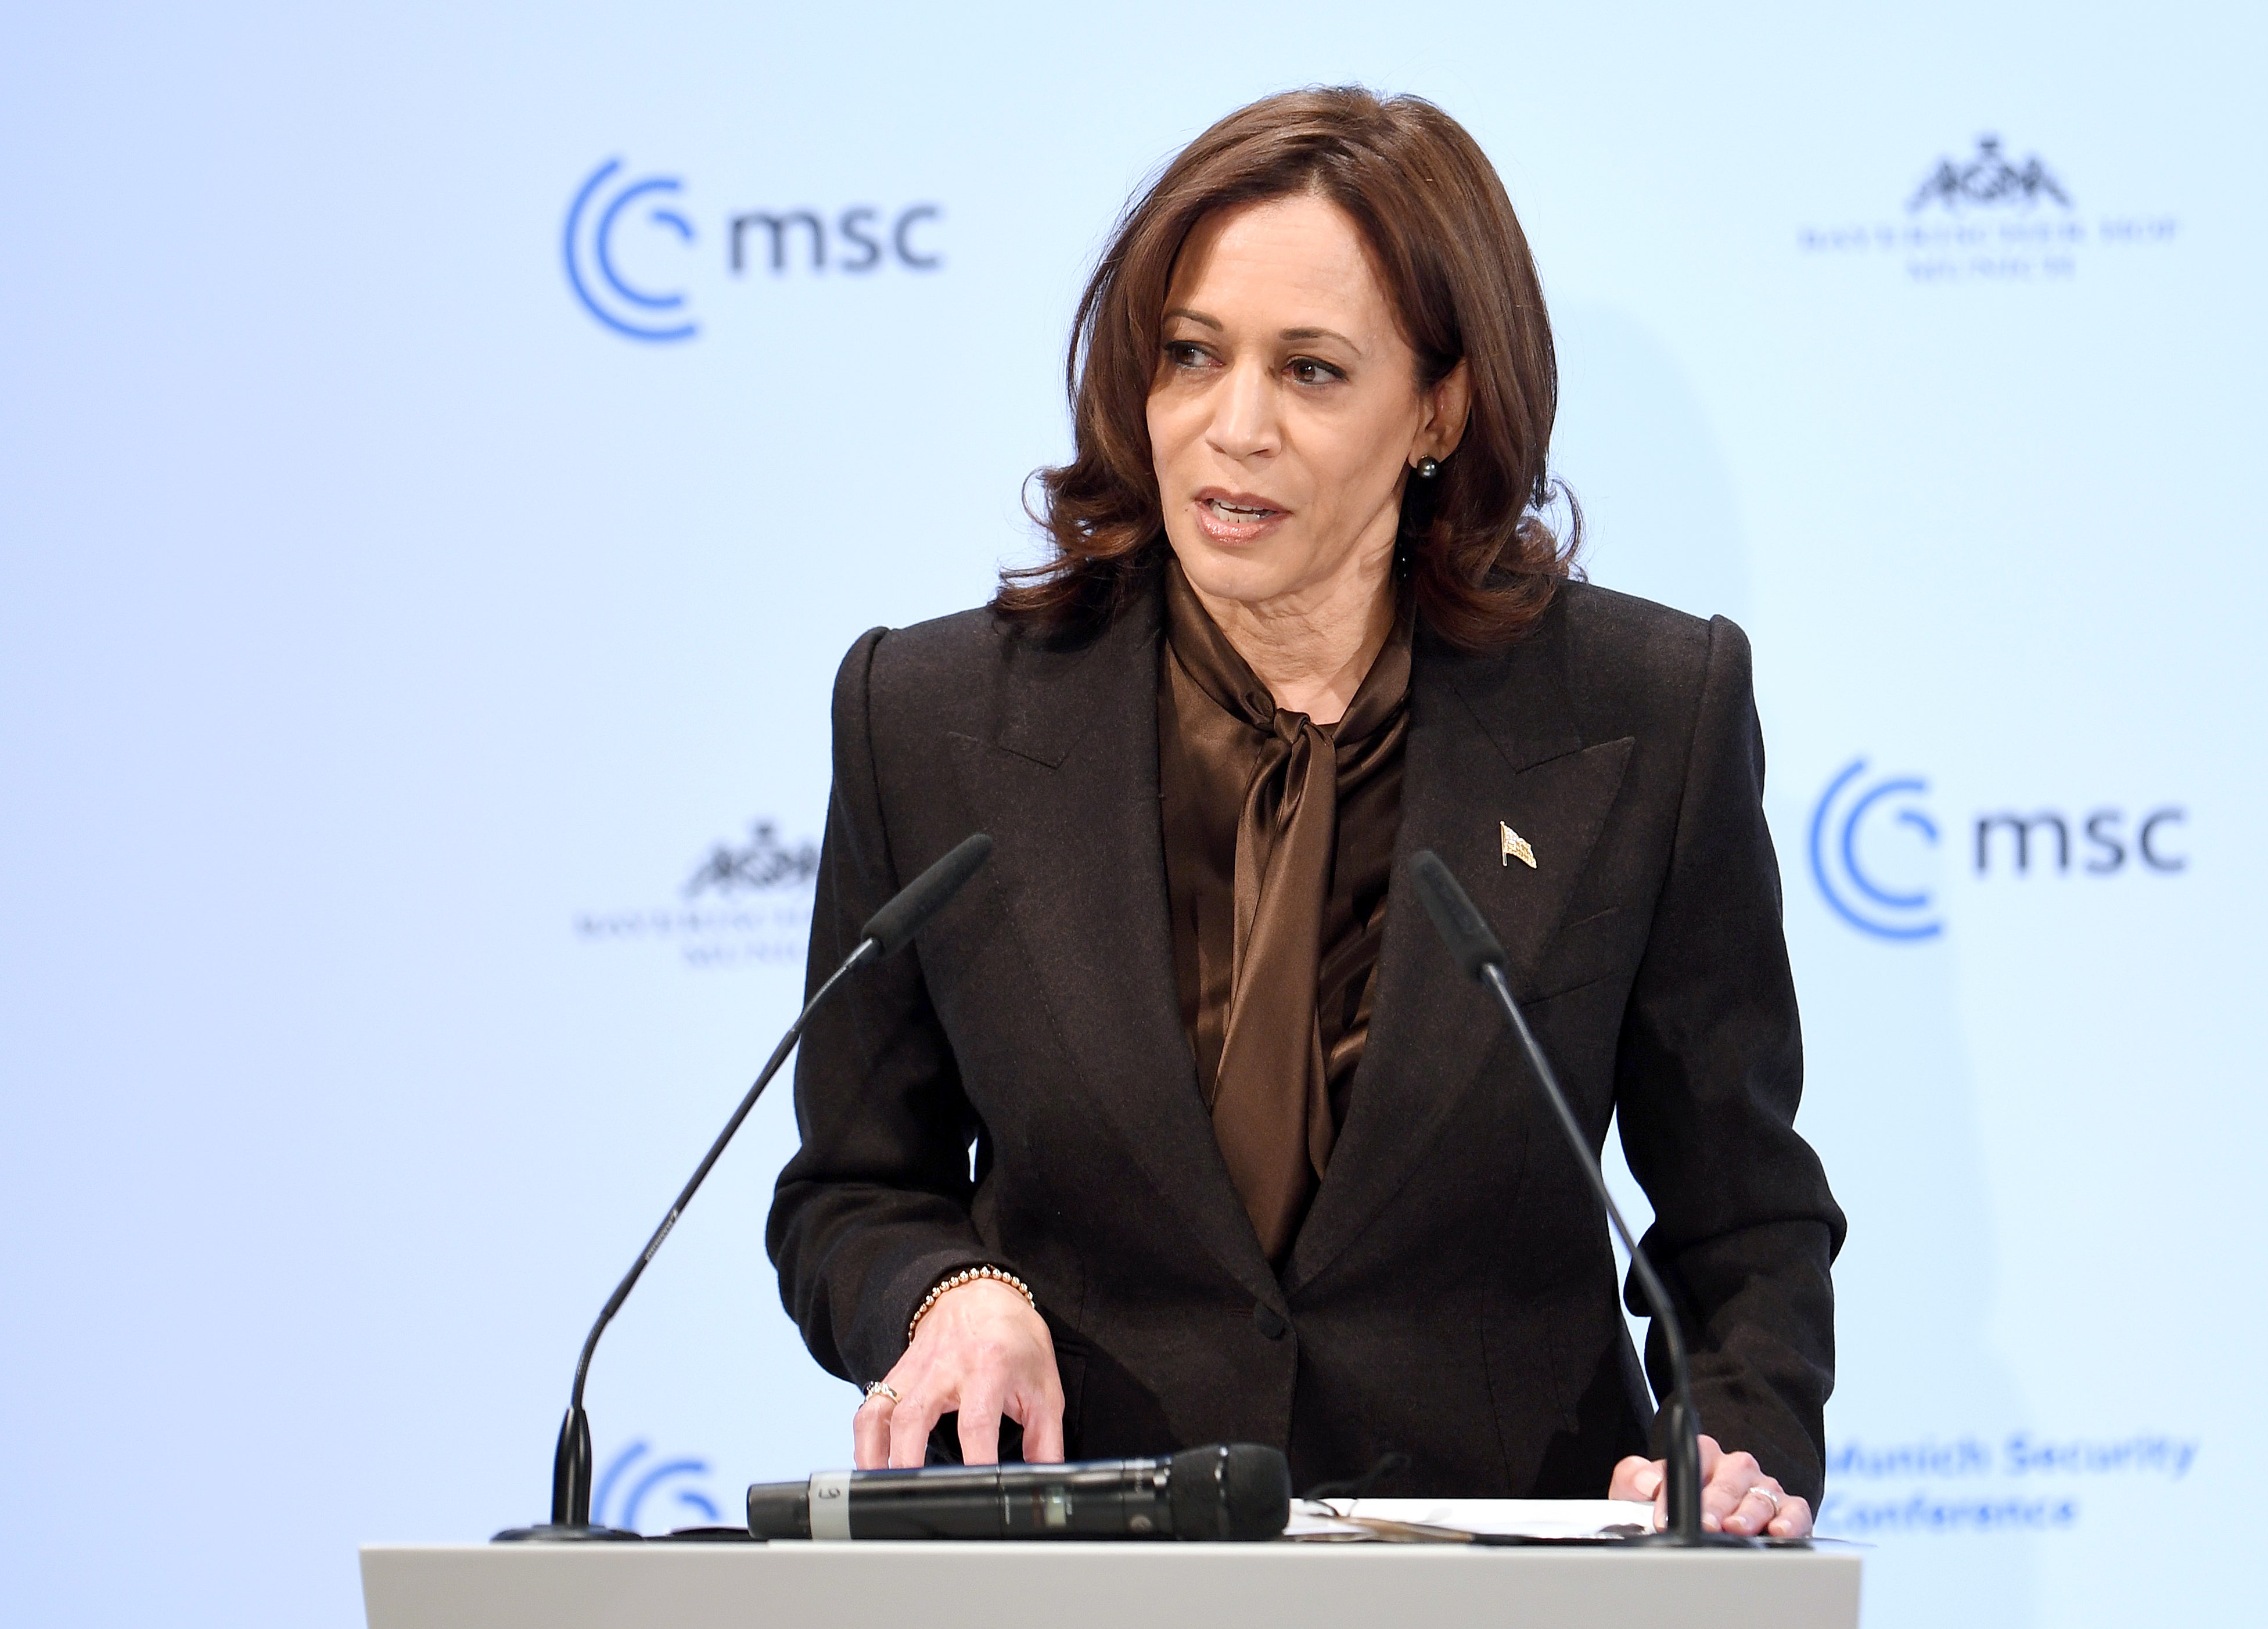 Kamala Harris says Russia will suffer significant economic costs if it invades Ukraine: 'Swift and severe'